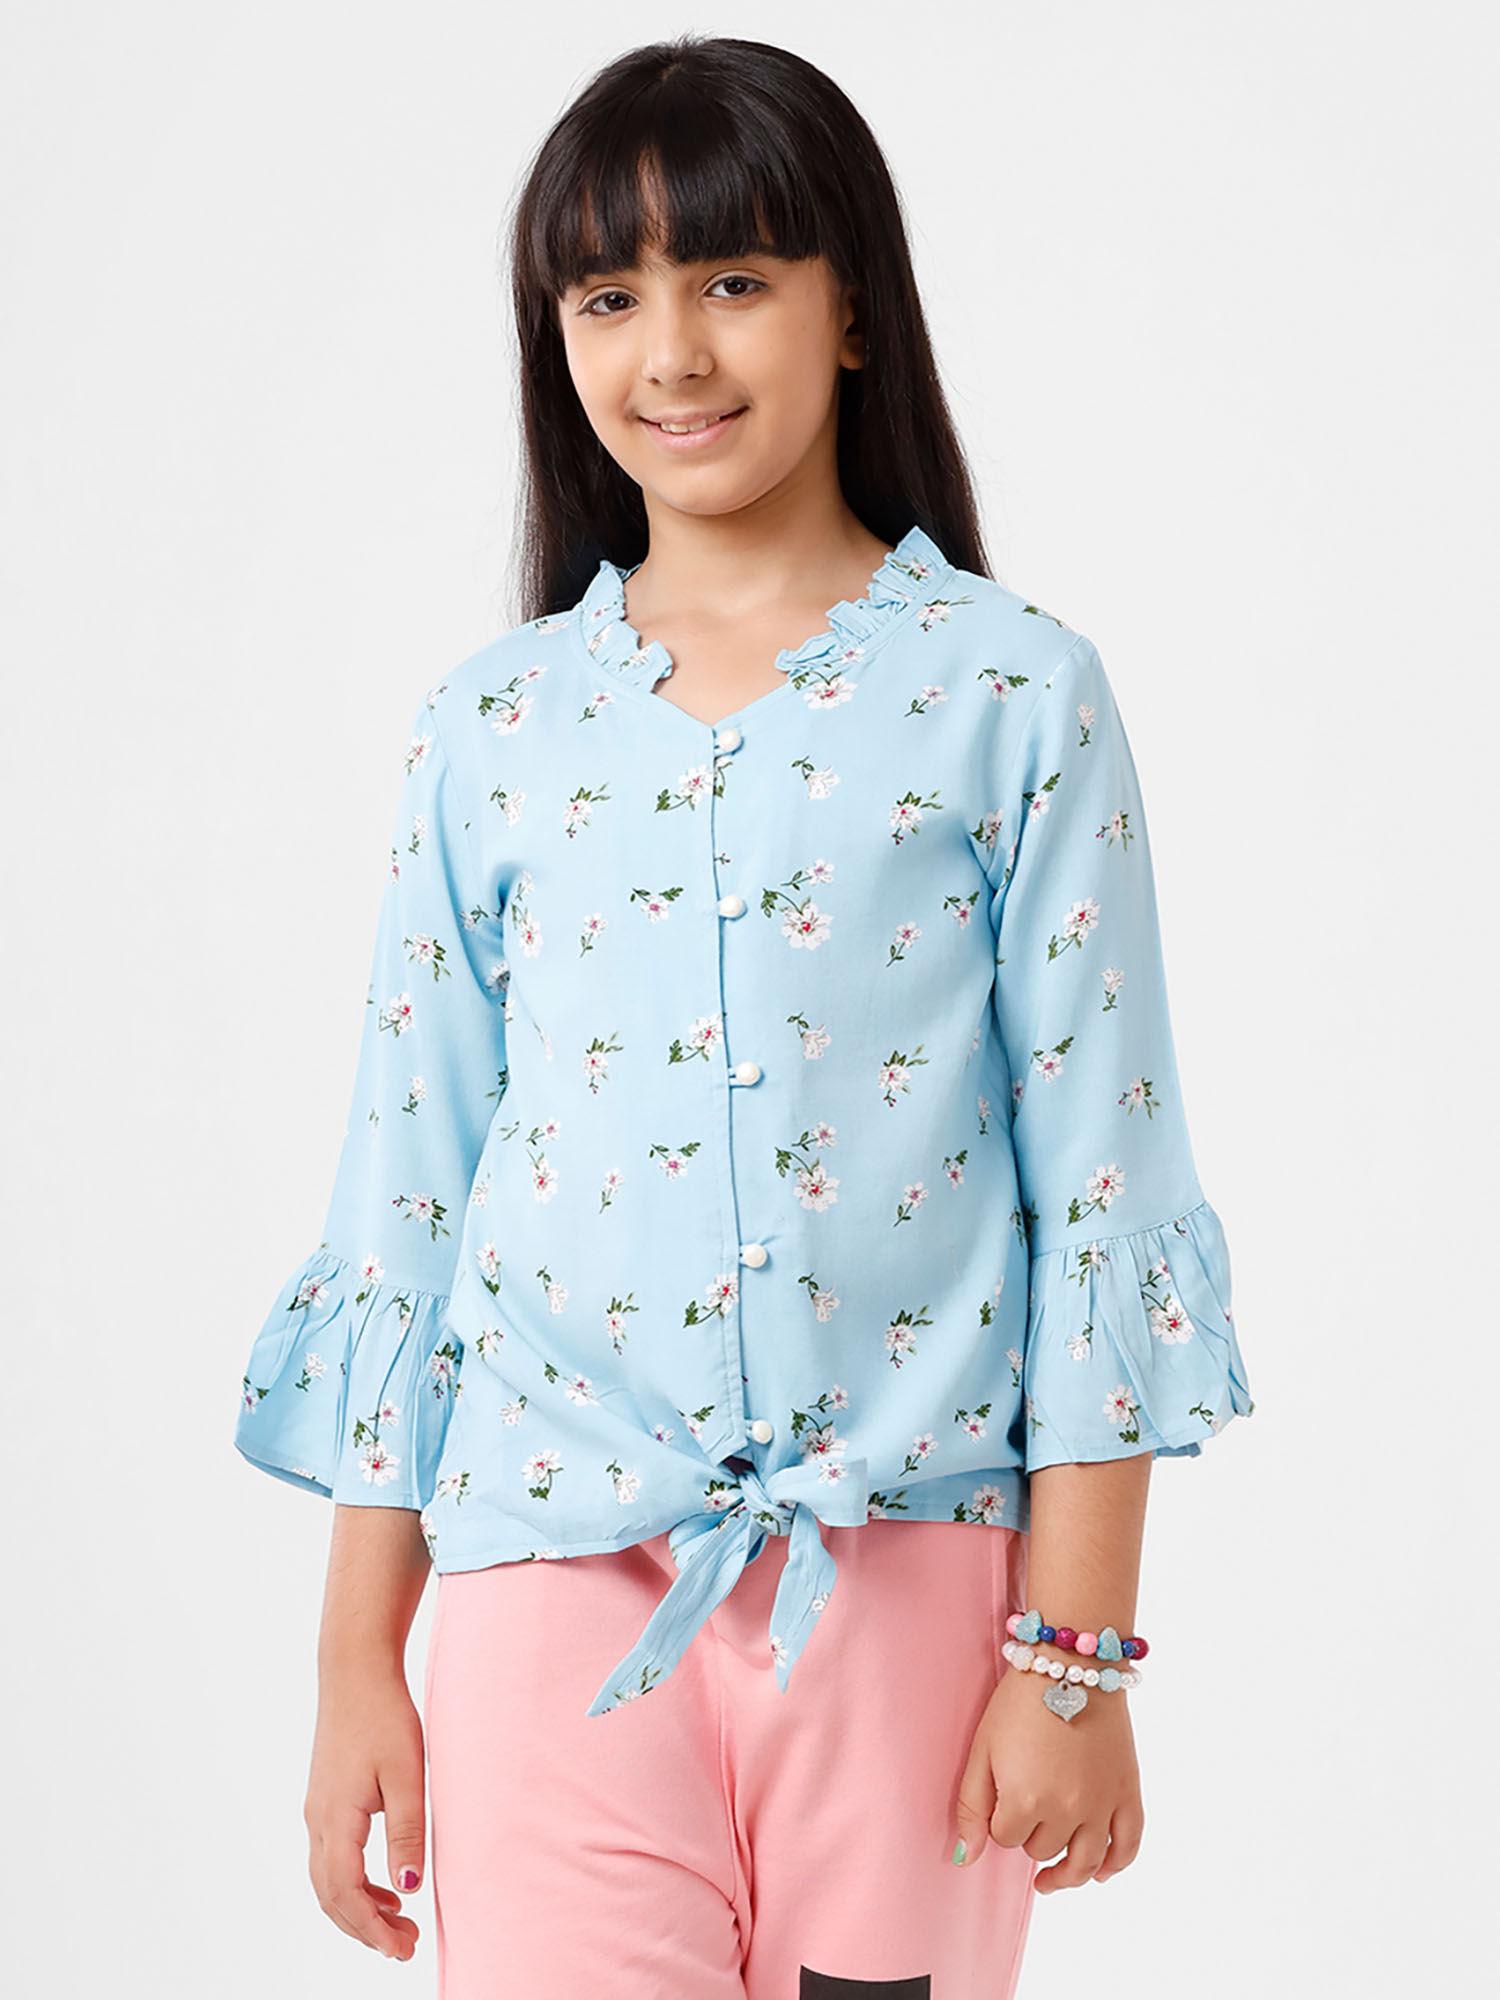 girls-top-woven-top-all-over-print-rayon-power-blue